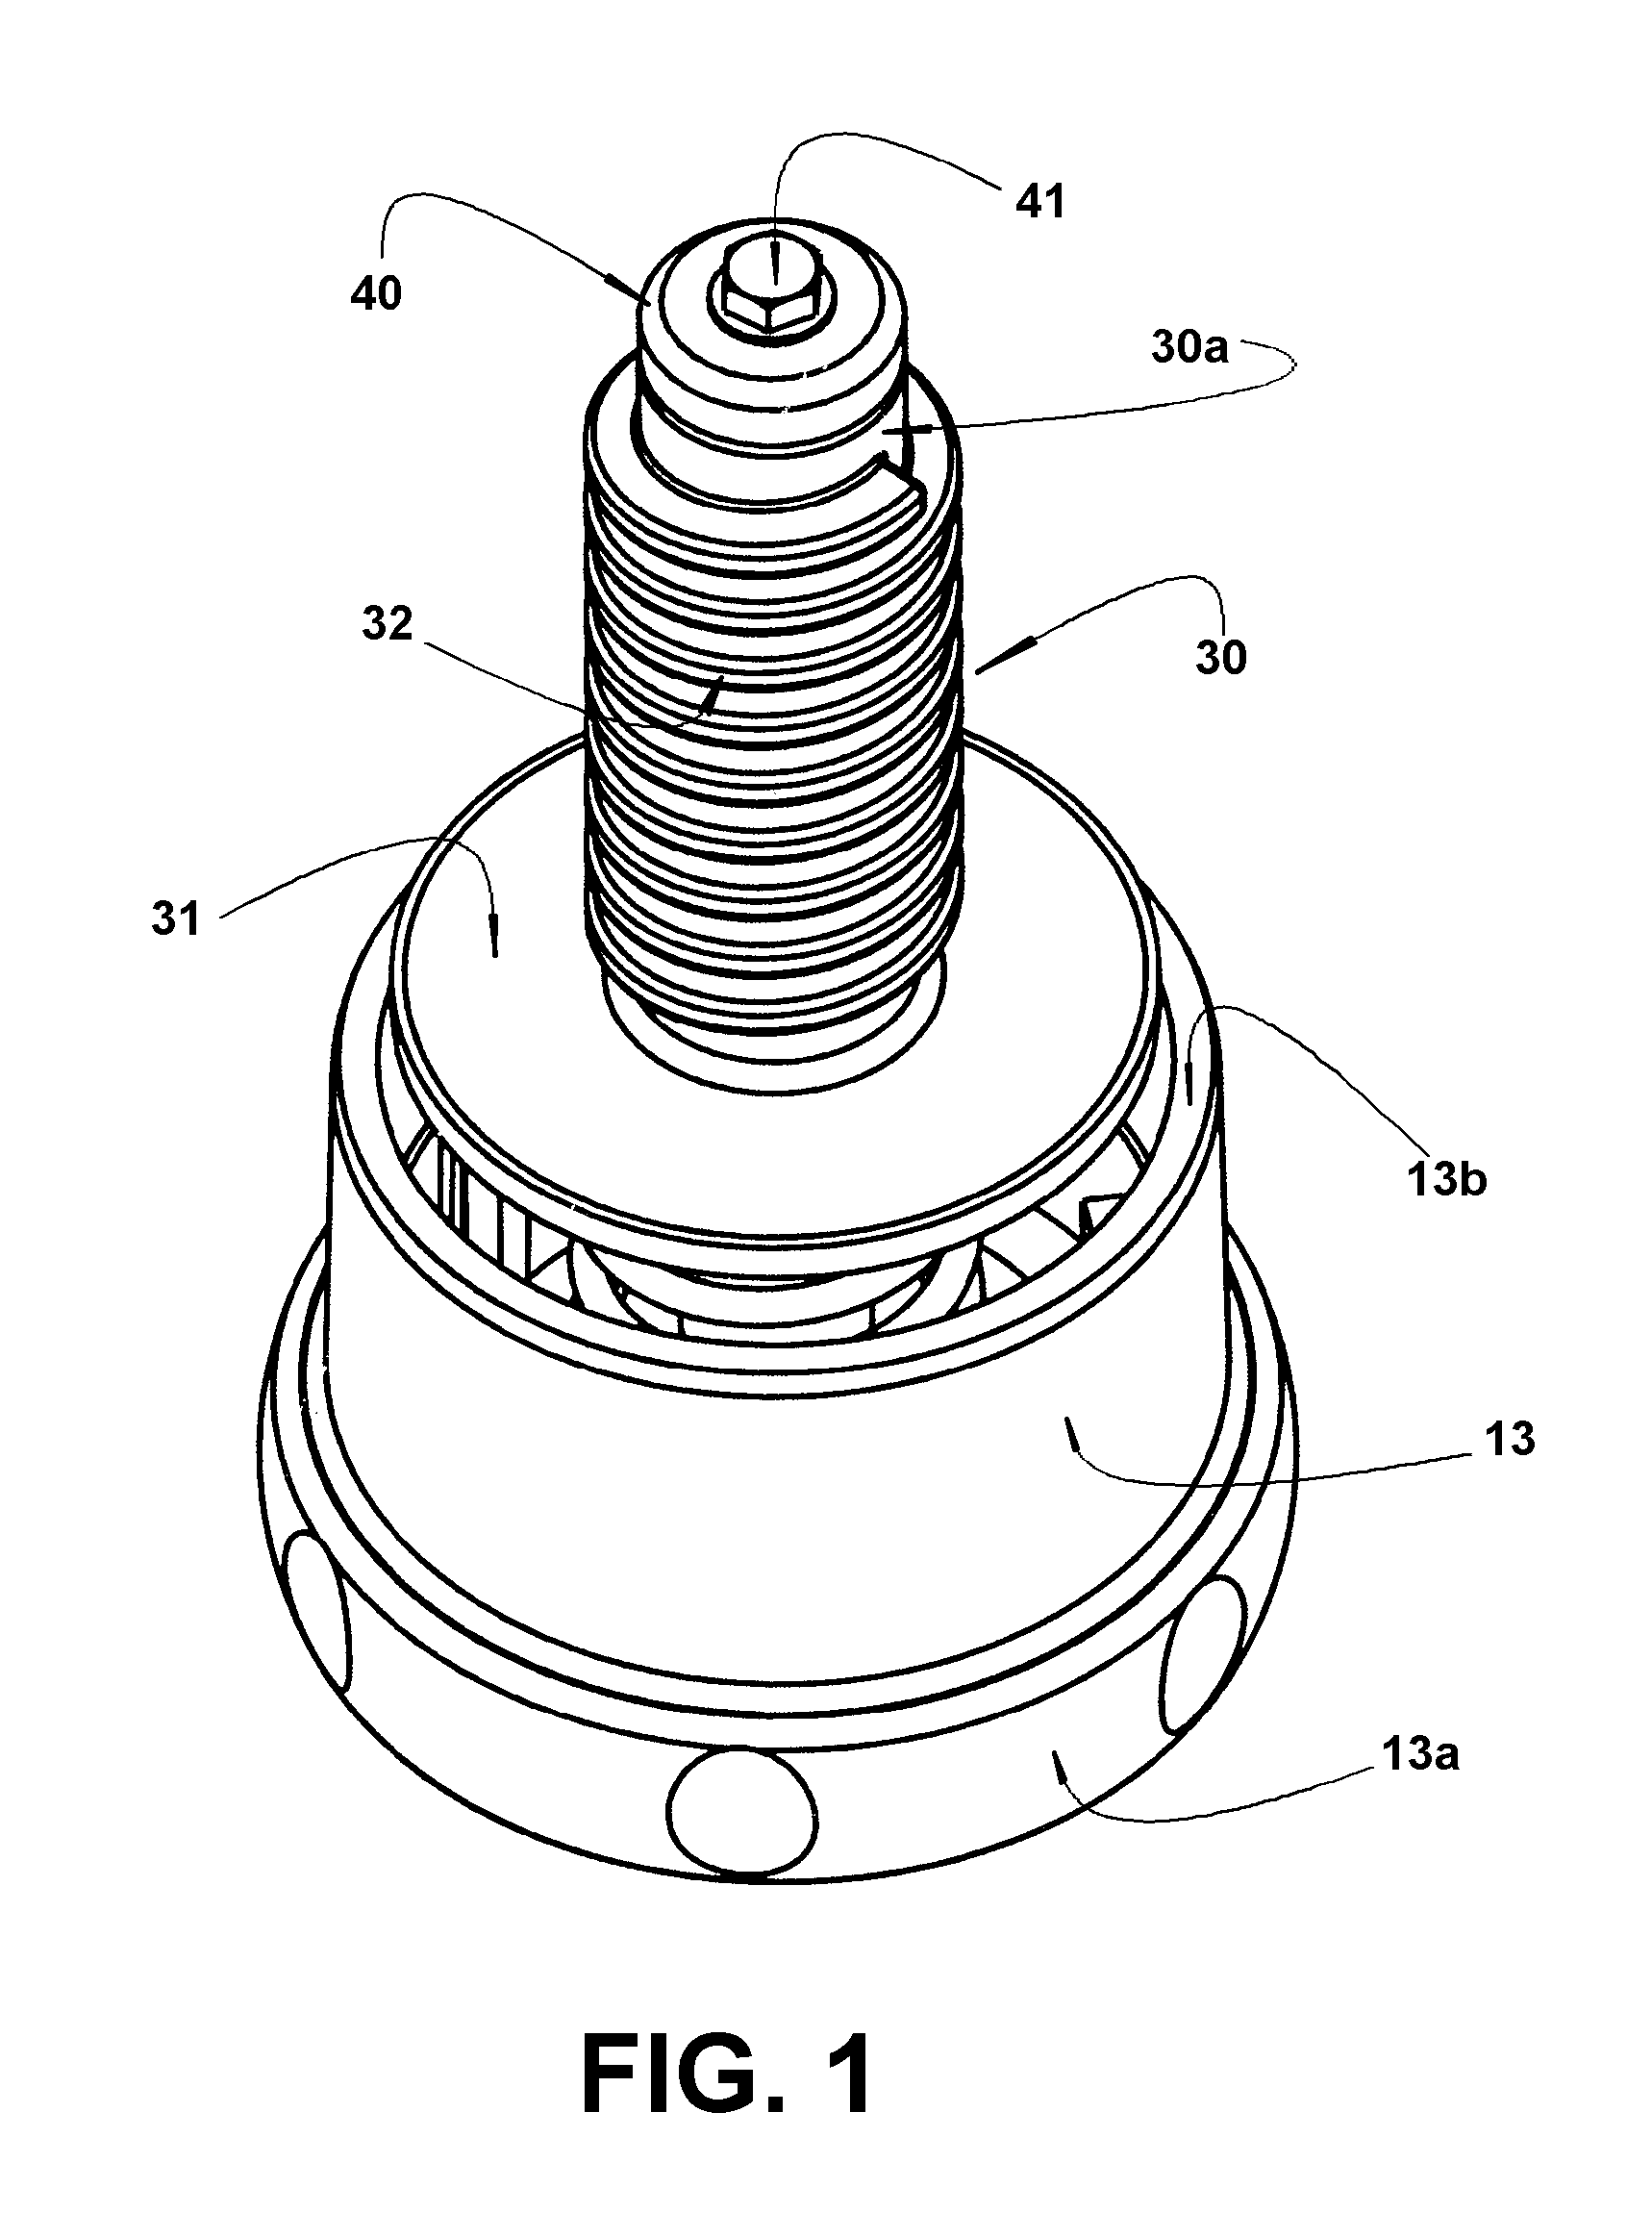 Self-leveling foot for an appliance